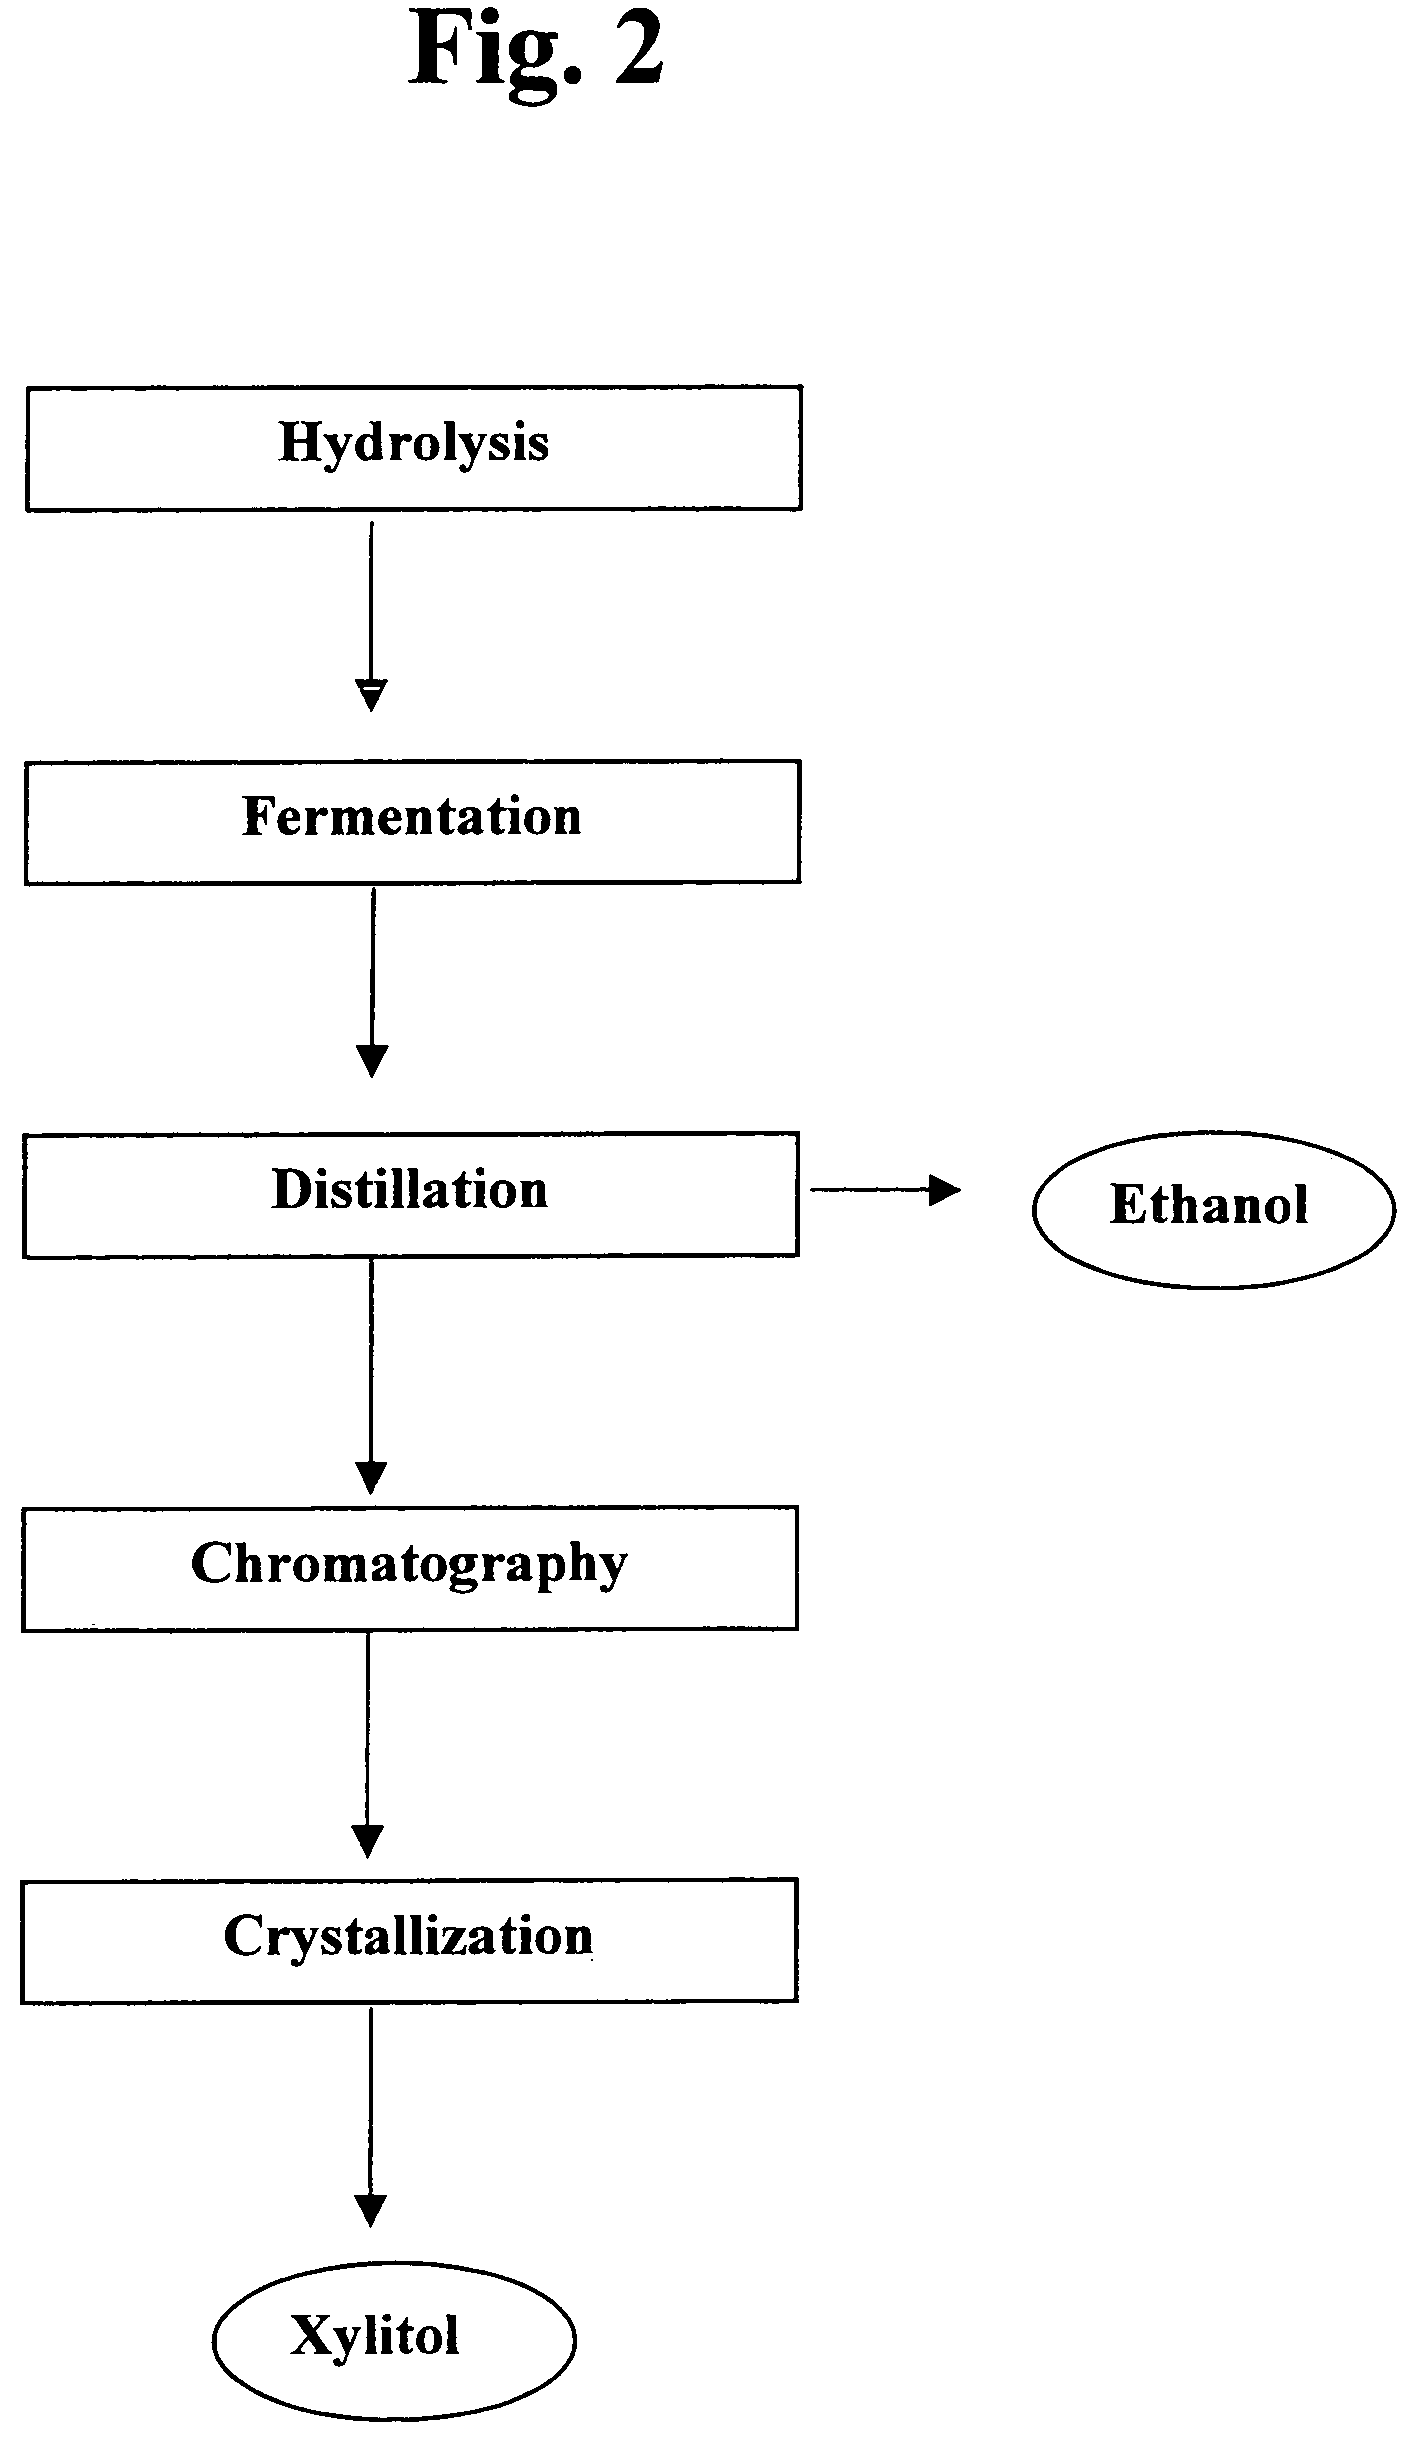 Process for the simultaneous production of xylitol and ethanol